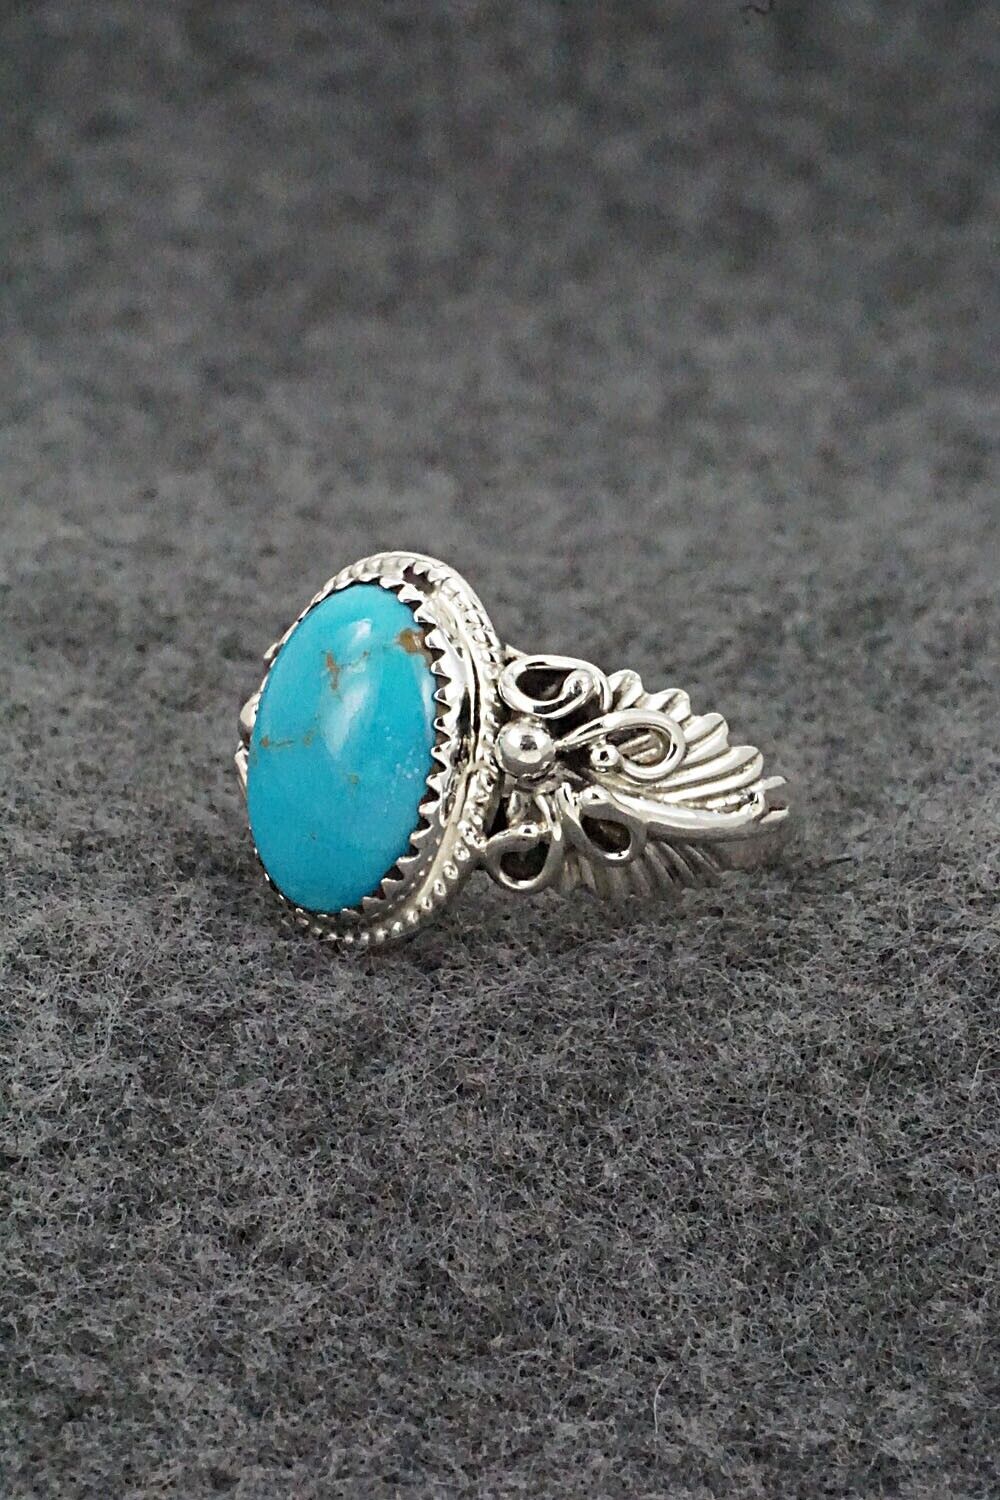 Turquoise & Sterling Silver Ring - Jeannette Saunders - Size 8.5